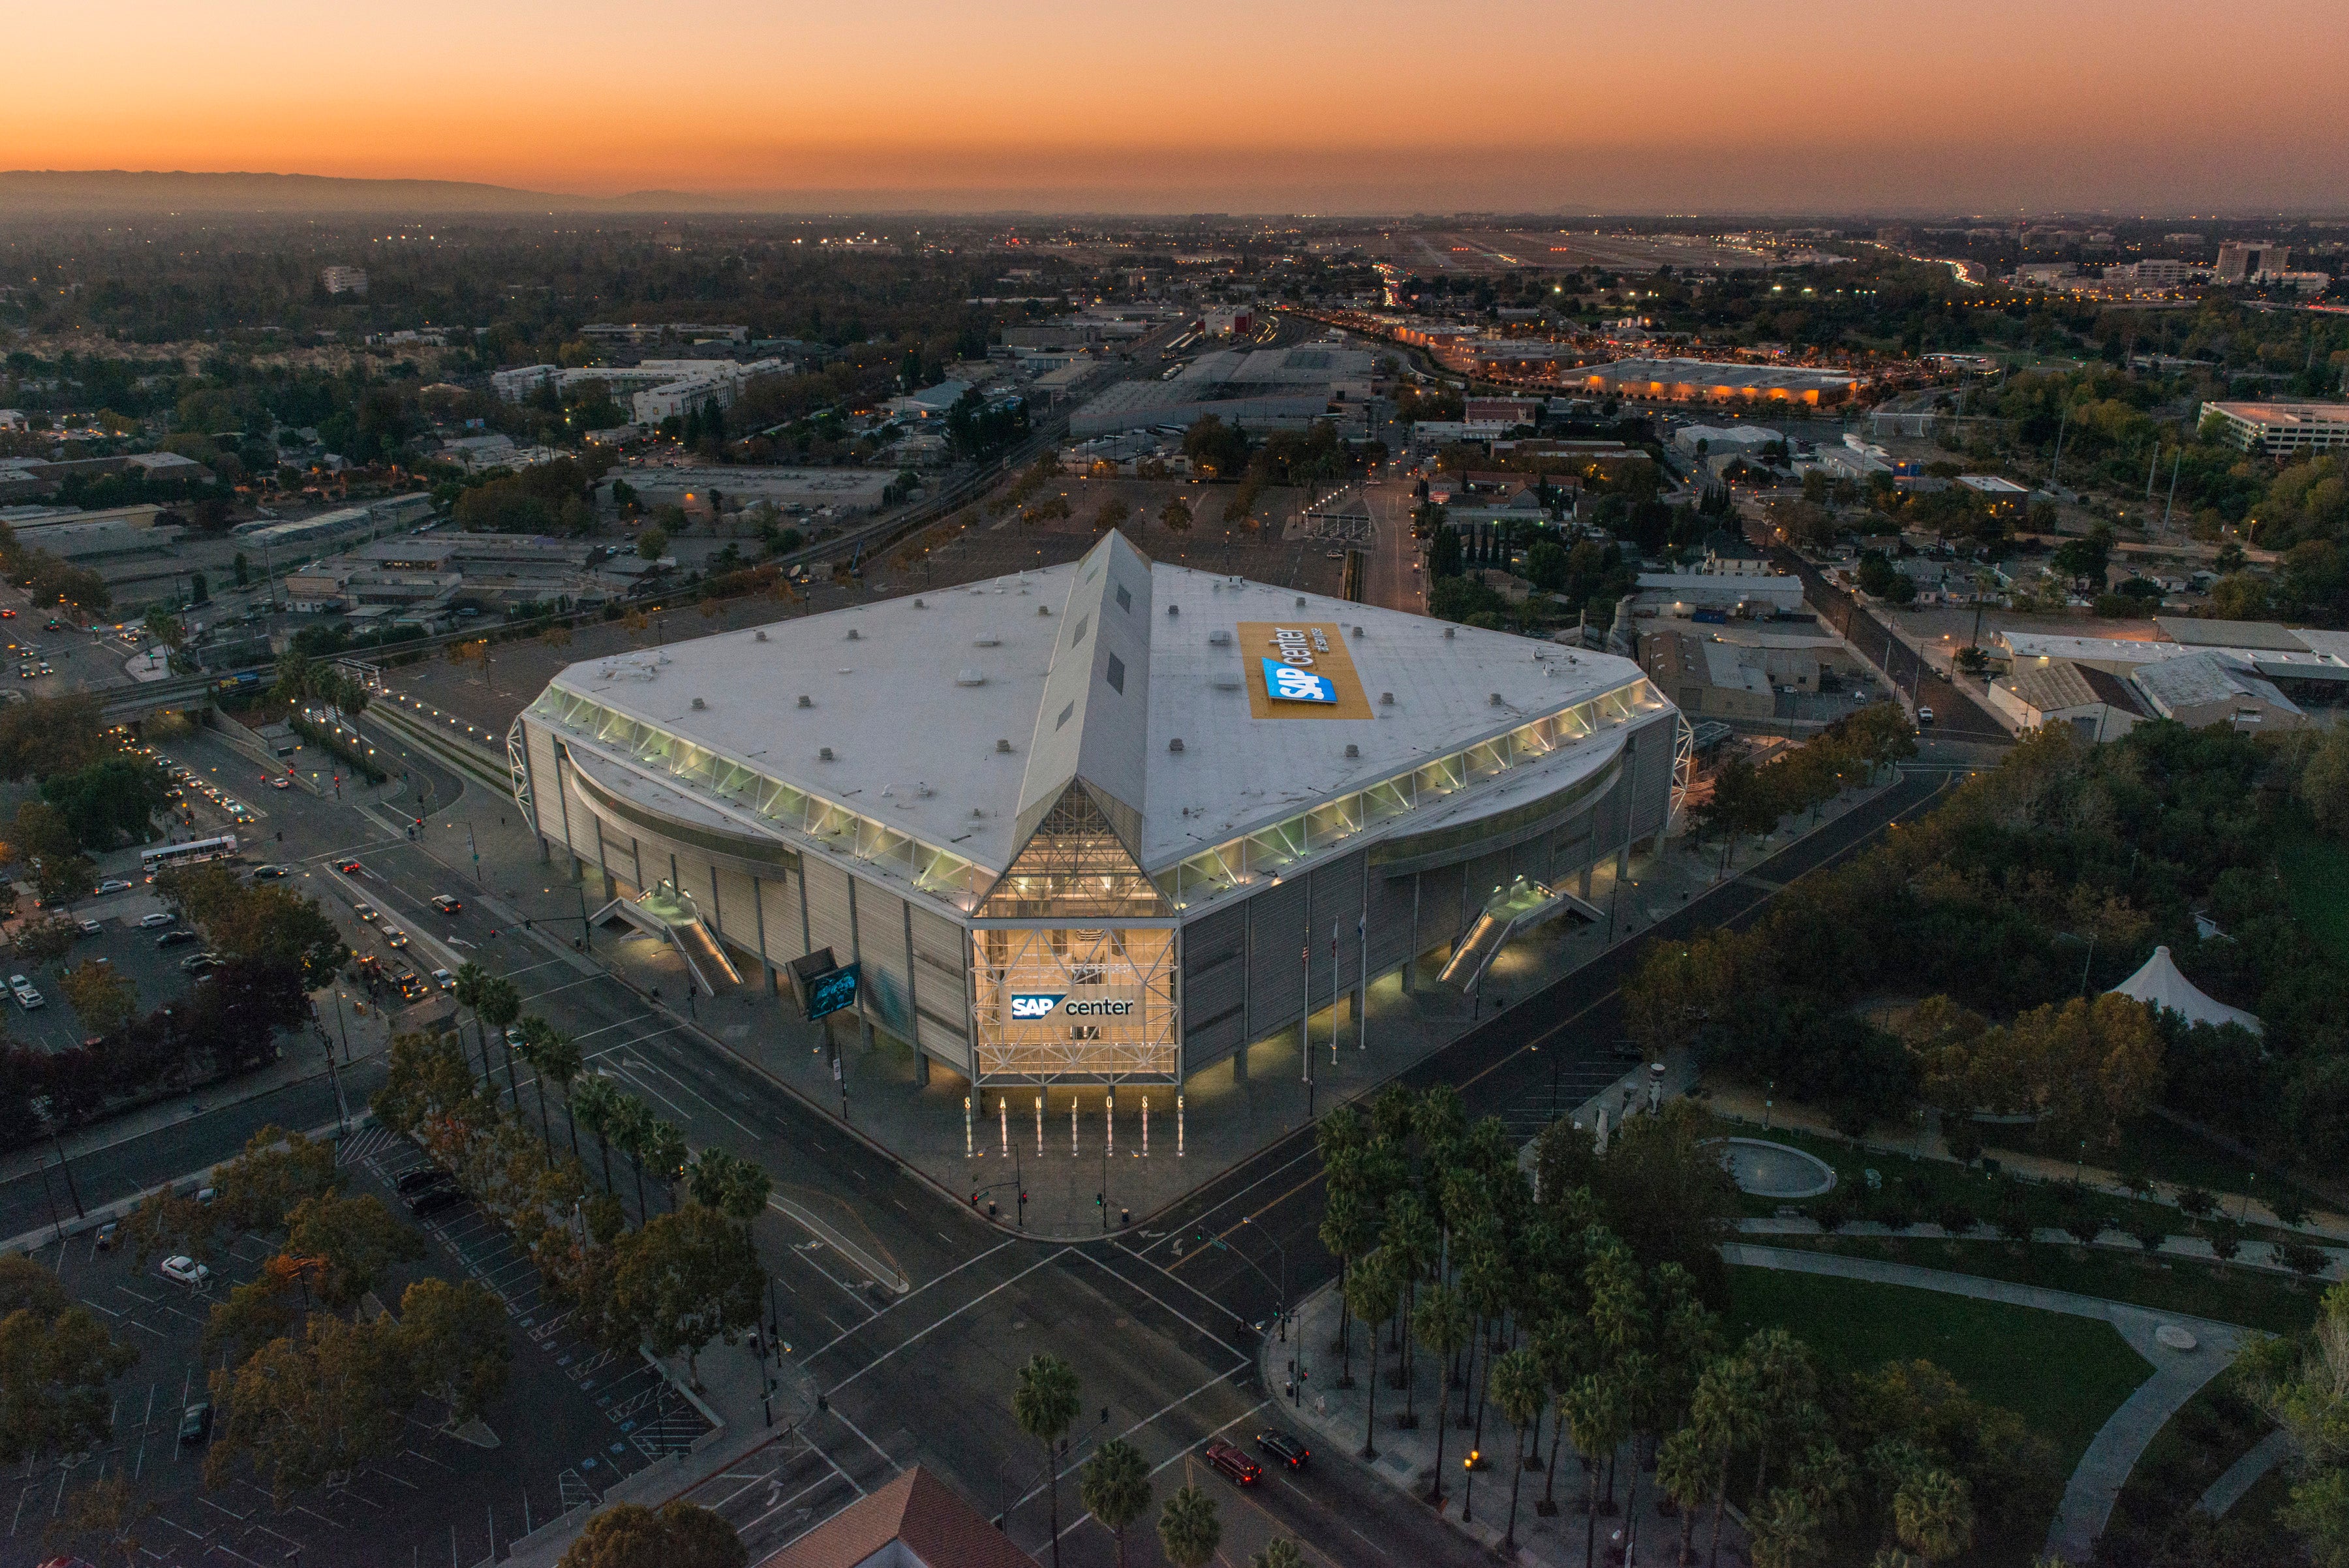 The history of the SAP Center - SJtoday